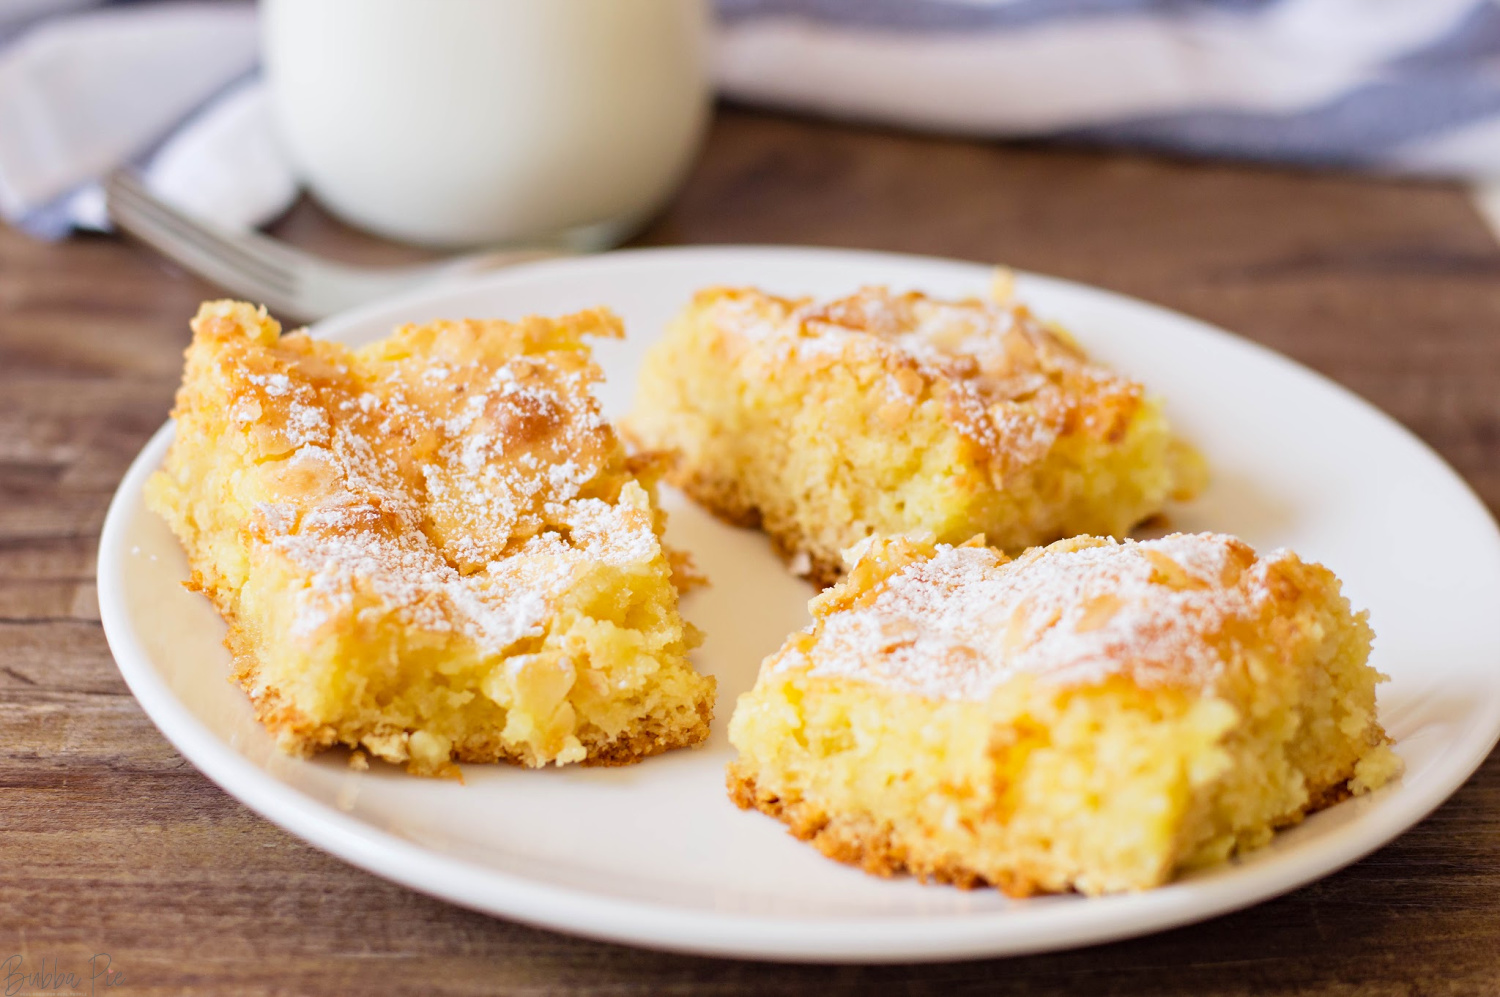 Ooey Gooey Butter Cake is rich, buttery and delicious cake mix recipe.